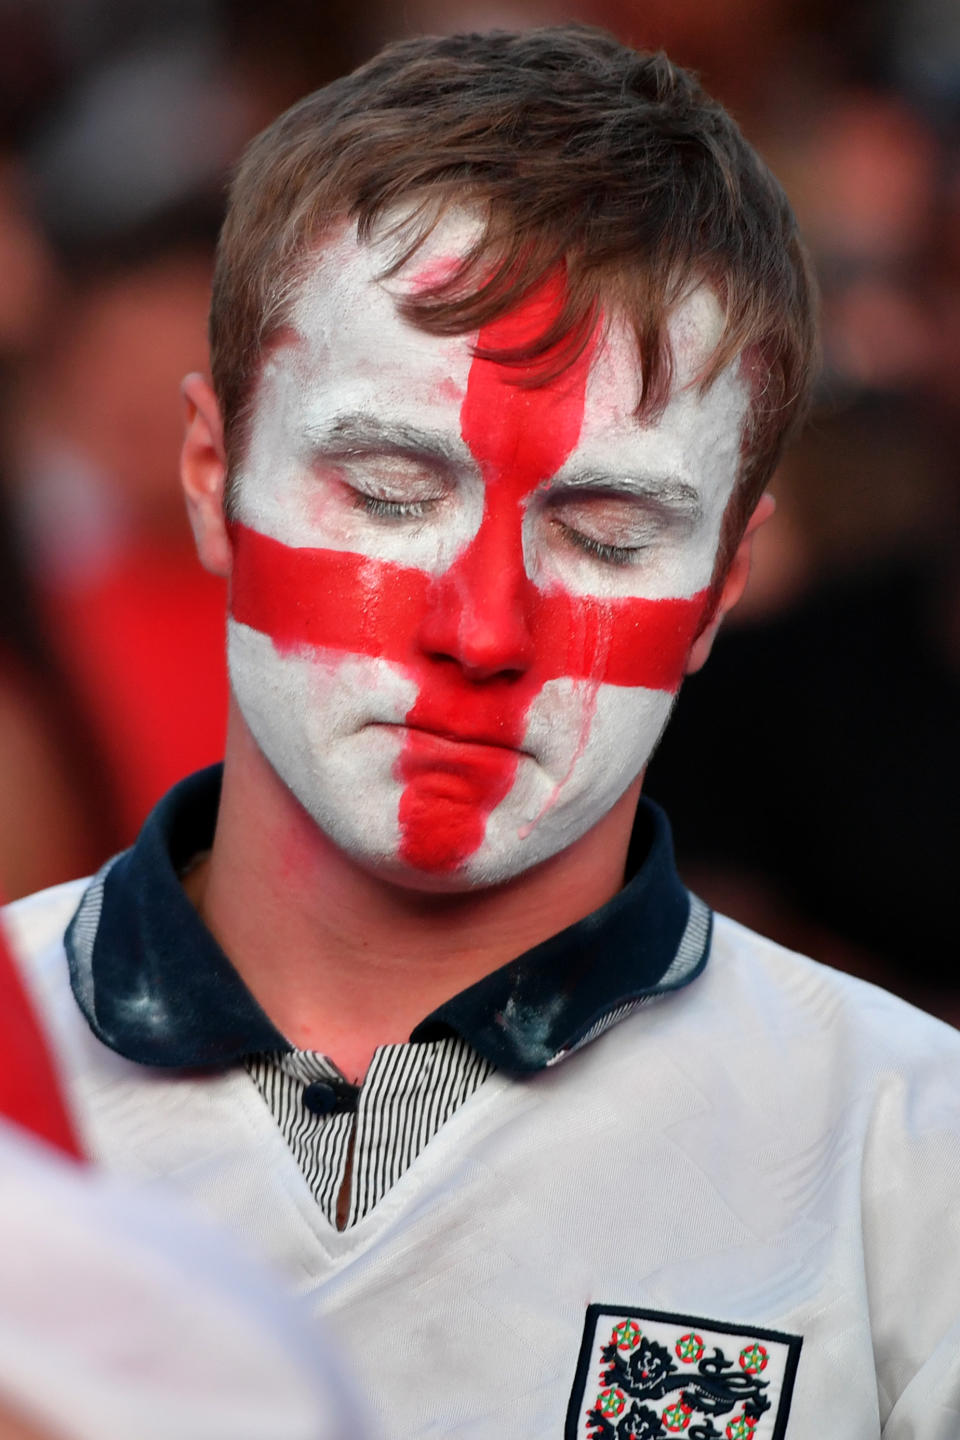 The agony of World Cup loss